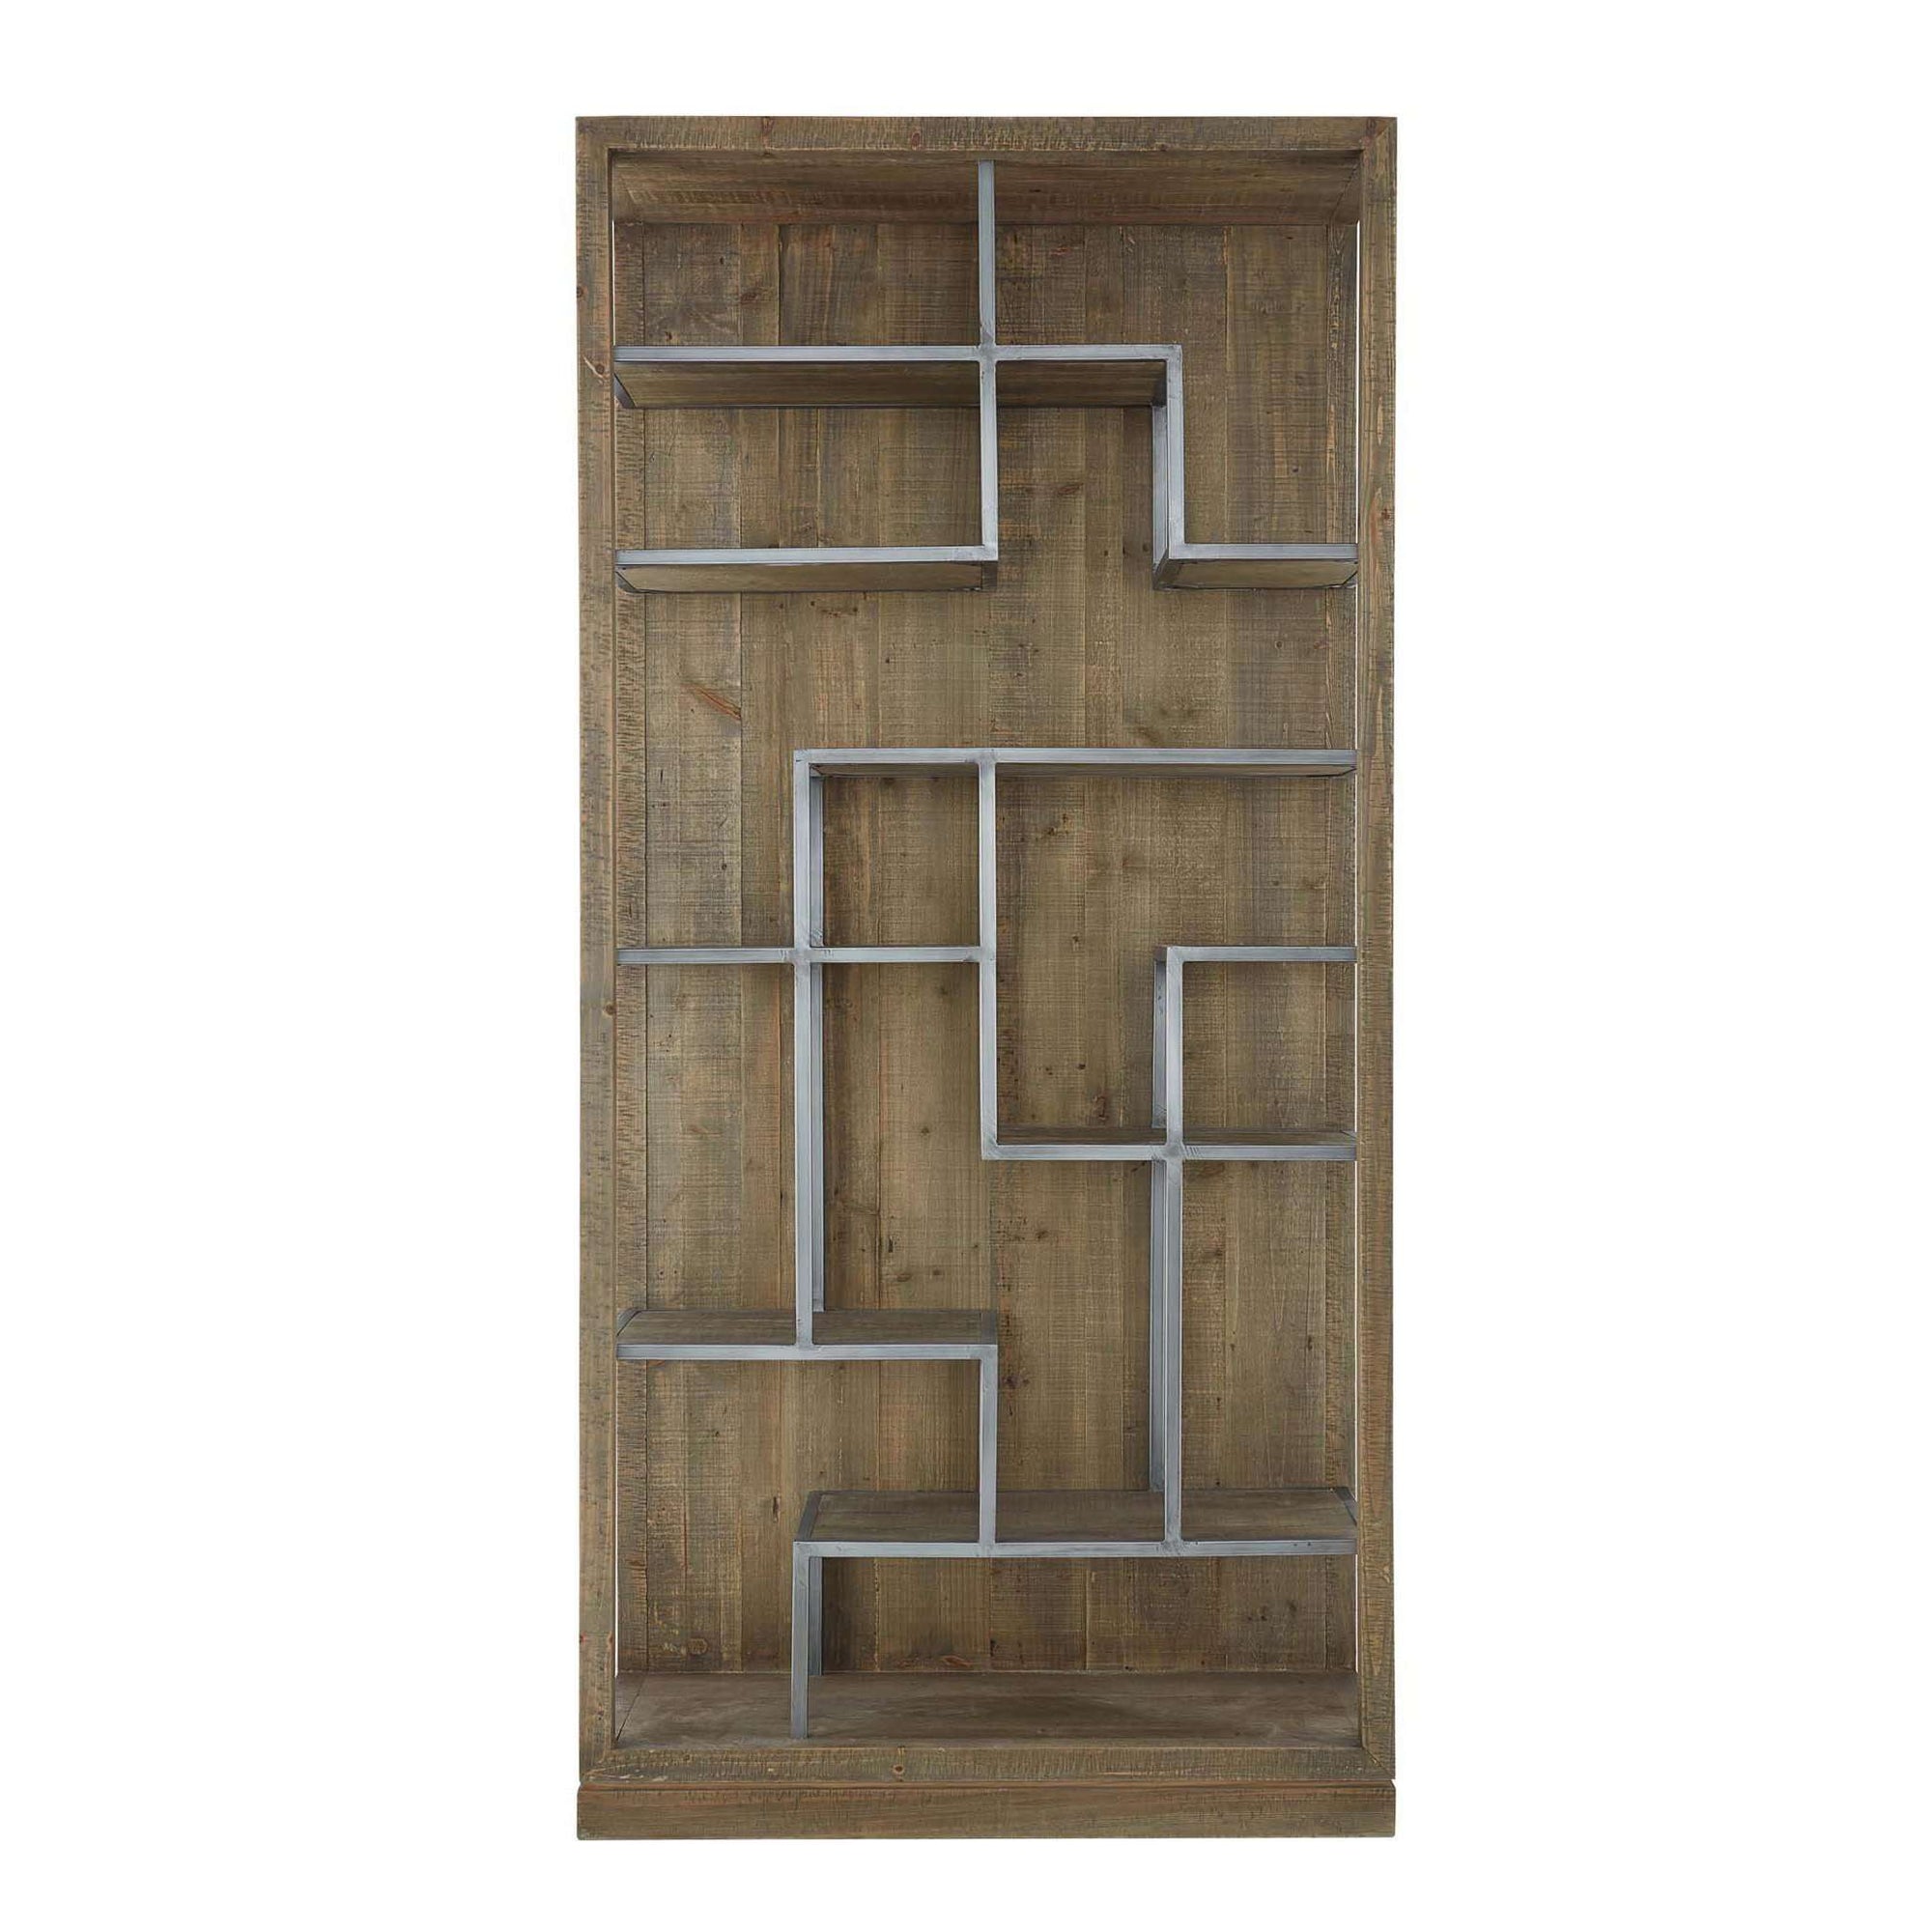 MOES-MAYER VERTICAL DISPLAY SHELF-Bookcases & Shelving-MODTEMPO